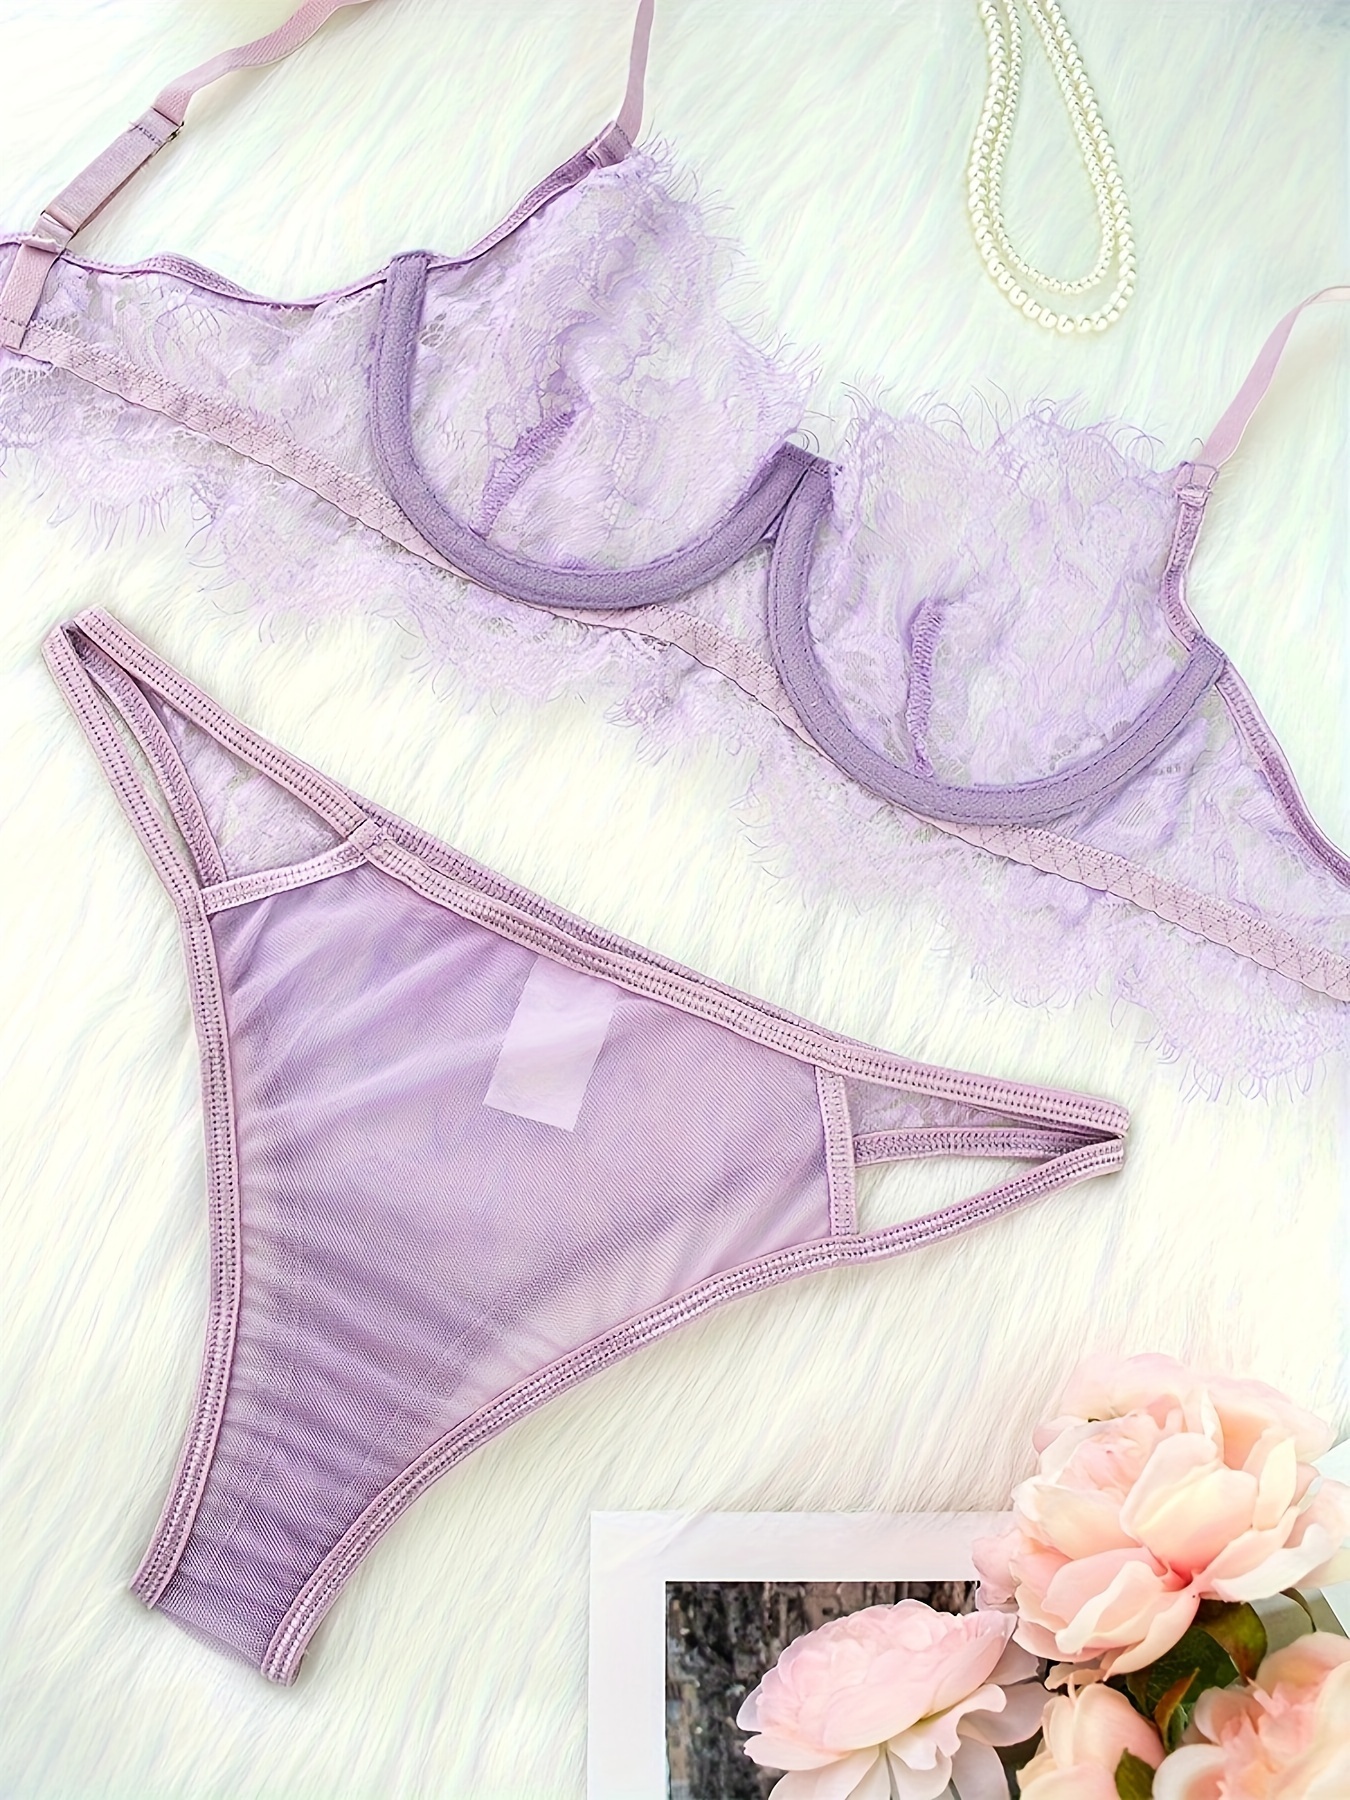 Lavender & Lace Lingerie and Accessories